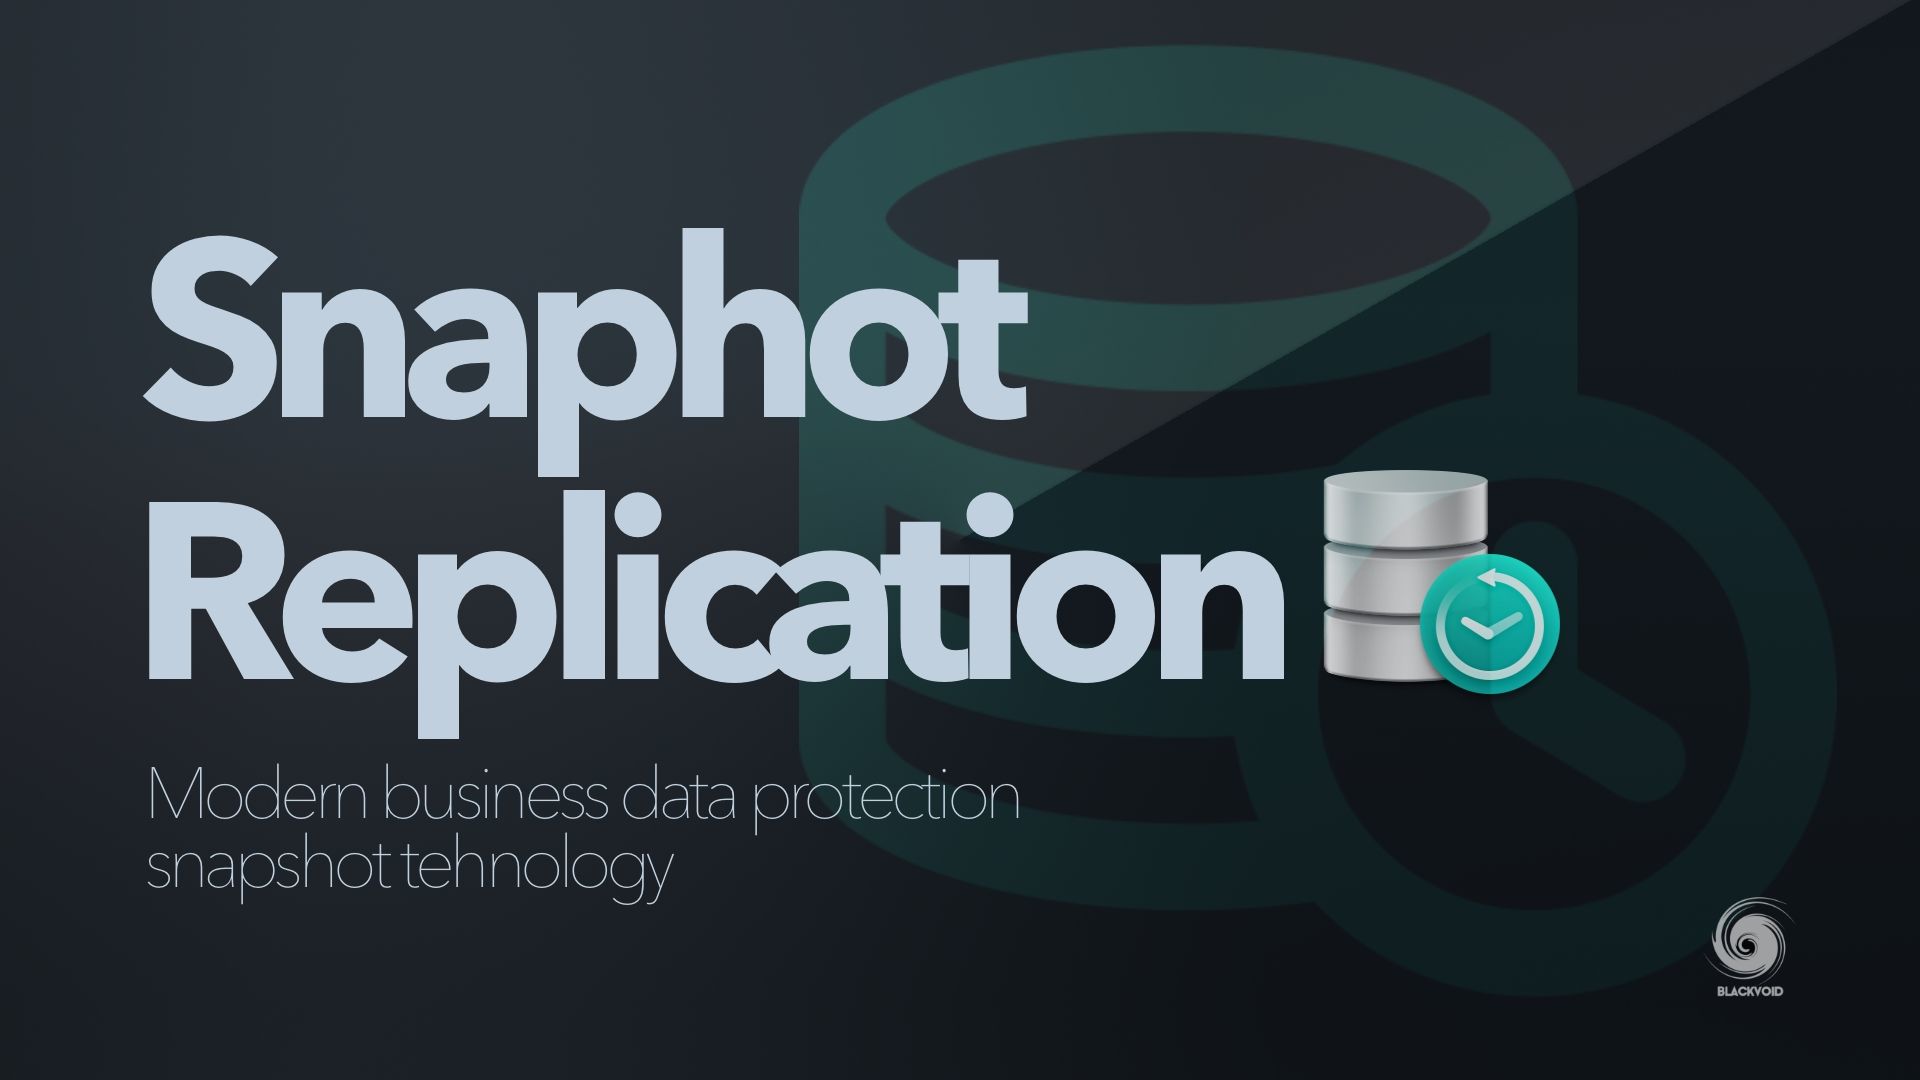 Snapshot & Replication - Synology’s business backup and recovery tool